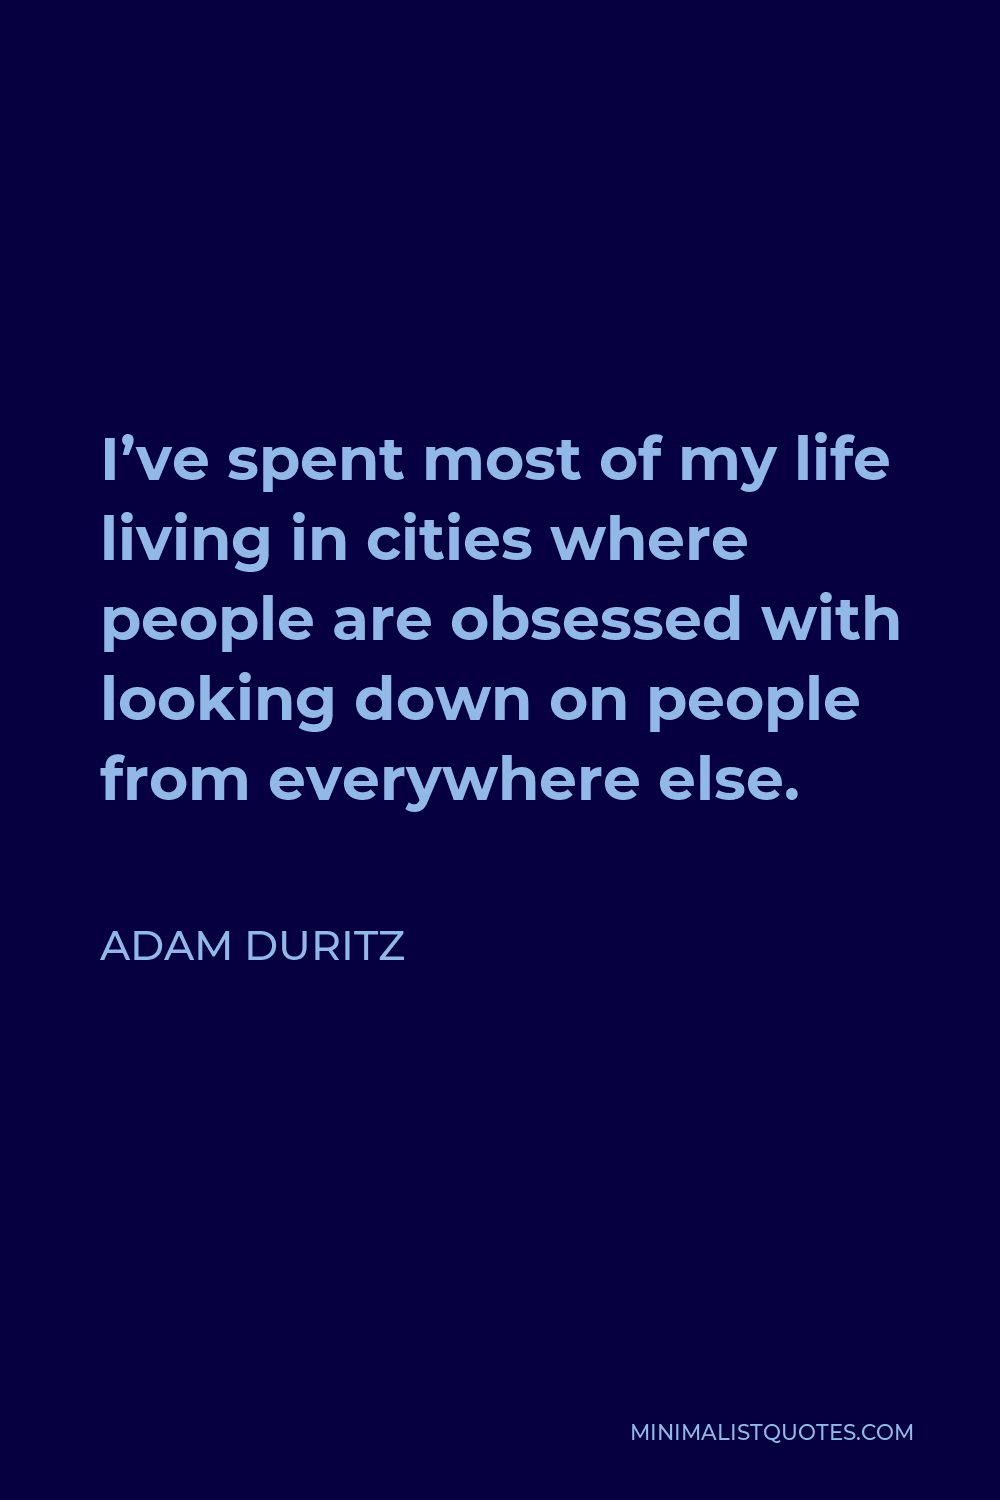 Adam Duritz Quote - I’ve spent most of my life living in cities where people are obsessed with looking down on people from everywhere else.